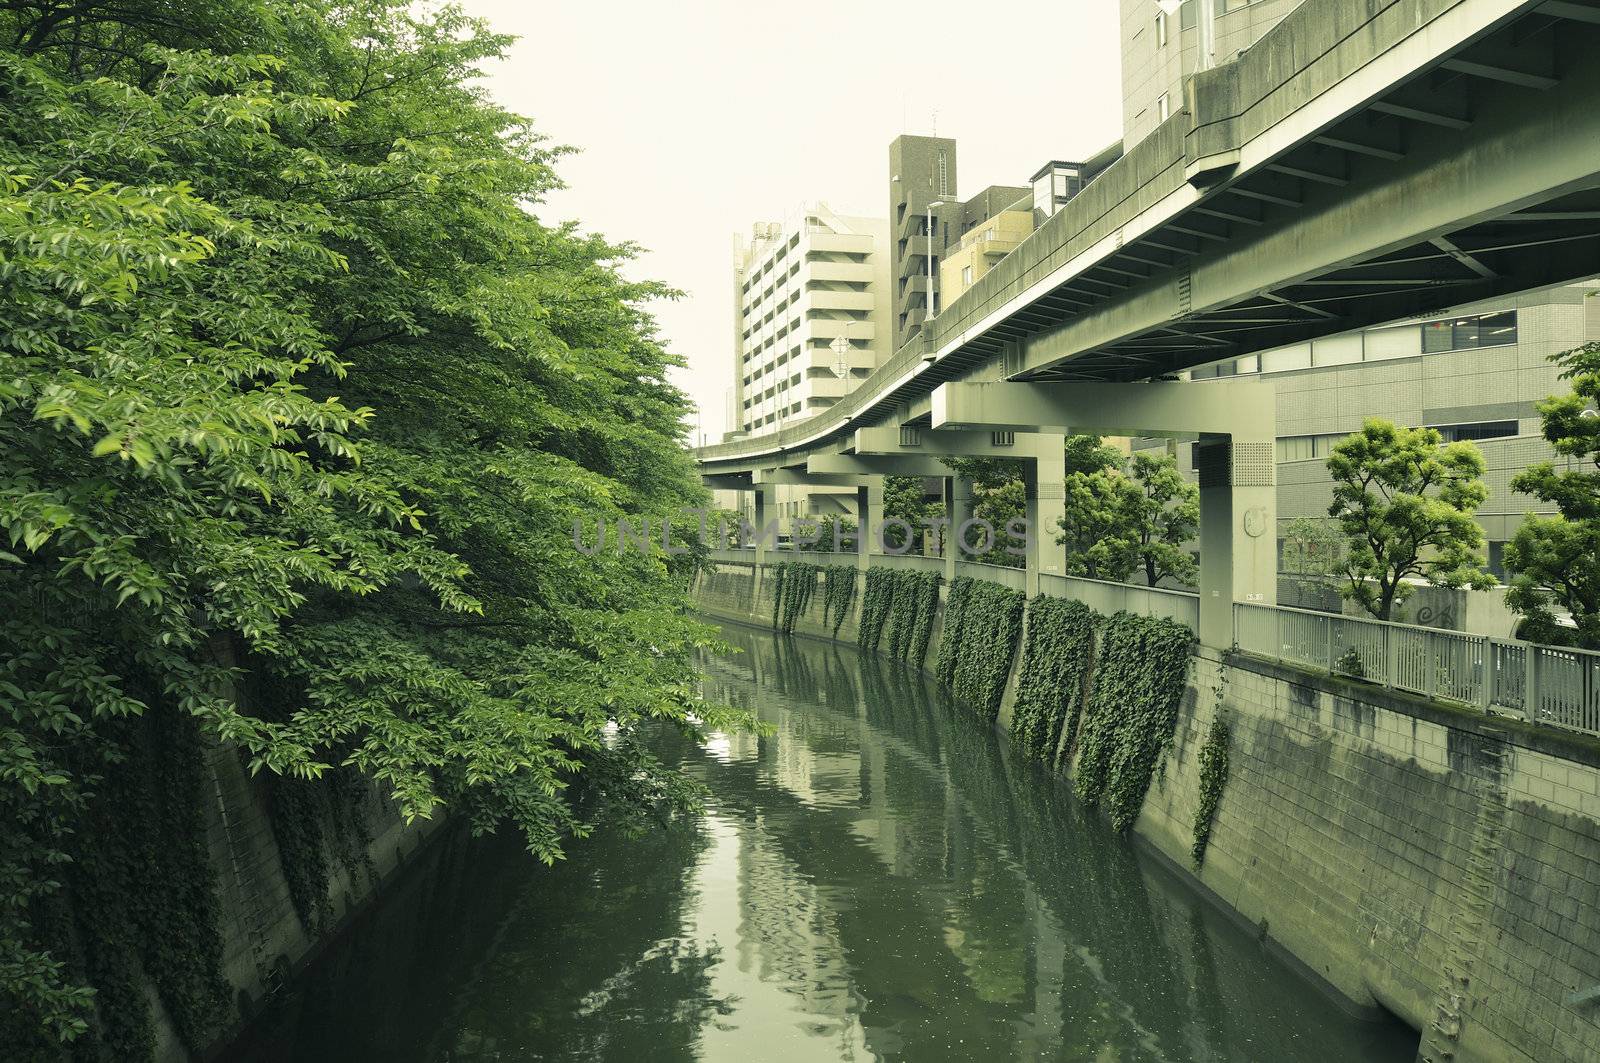 Edogawa river with green trees on one side and hanged highway on another side inside Tokyo Metropolis